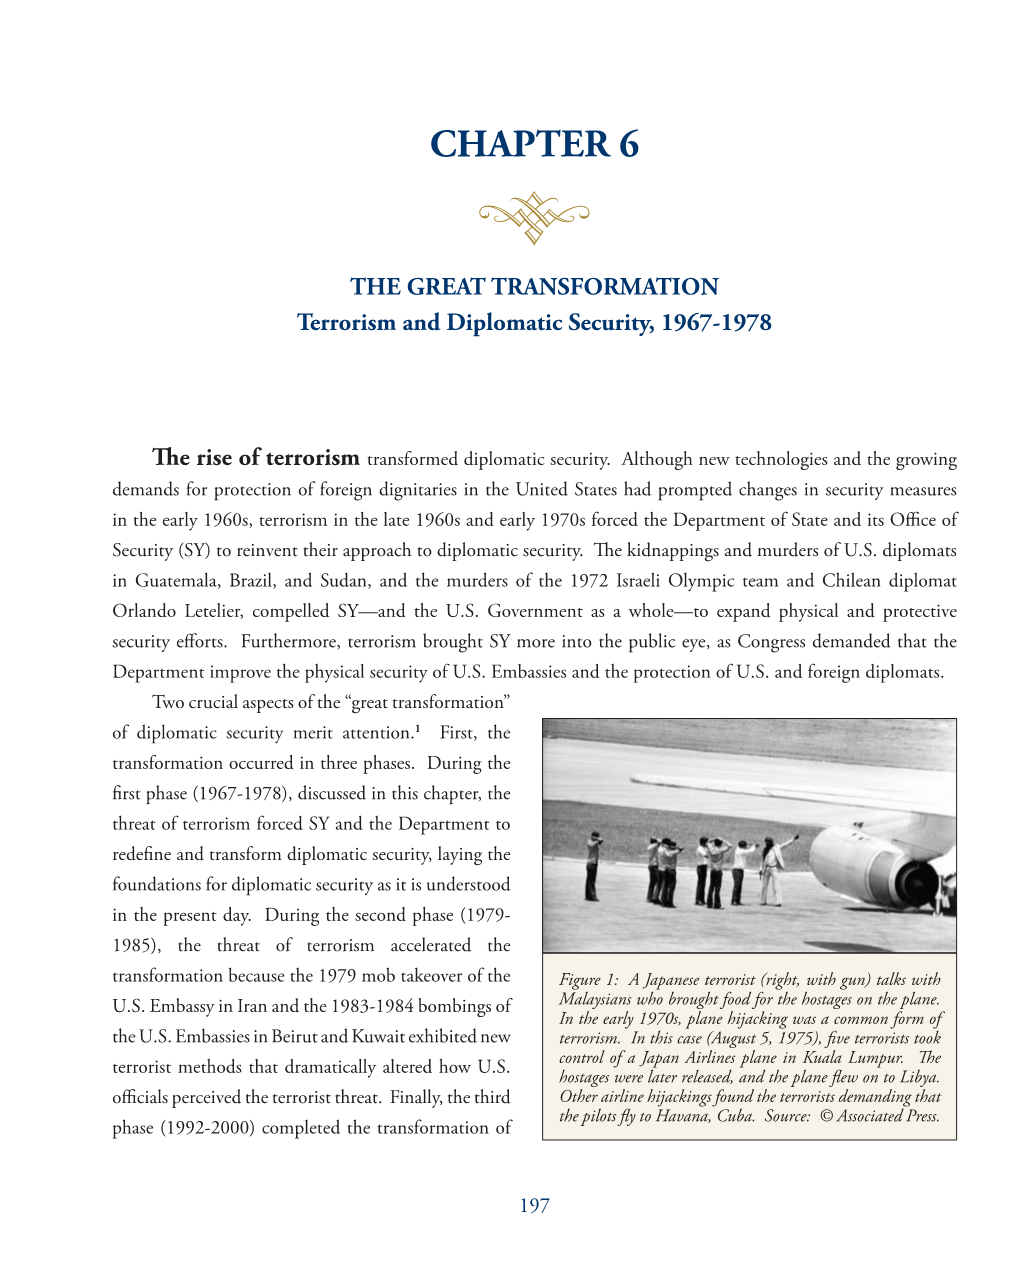 CHAPTER 6 the GREAT TRANSFORMATION: Terrorism and Diplomatic Security, 1967-1978